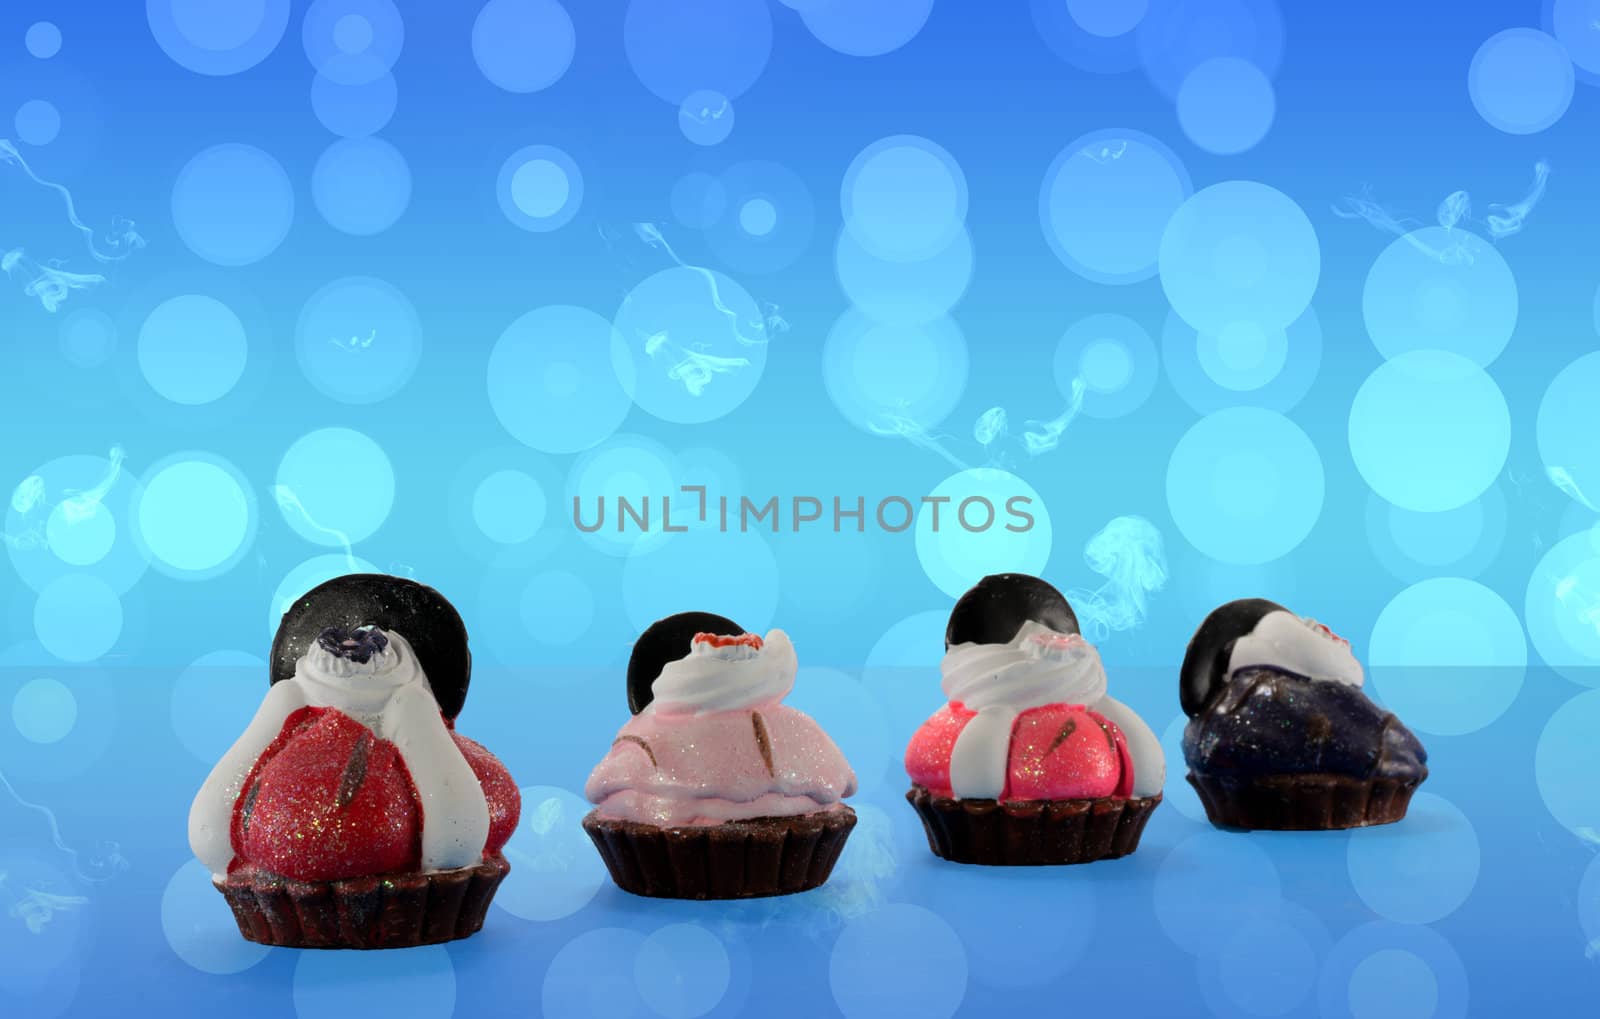 imitation cupcakes with blue background by compuinfoto